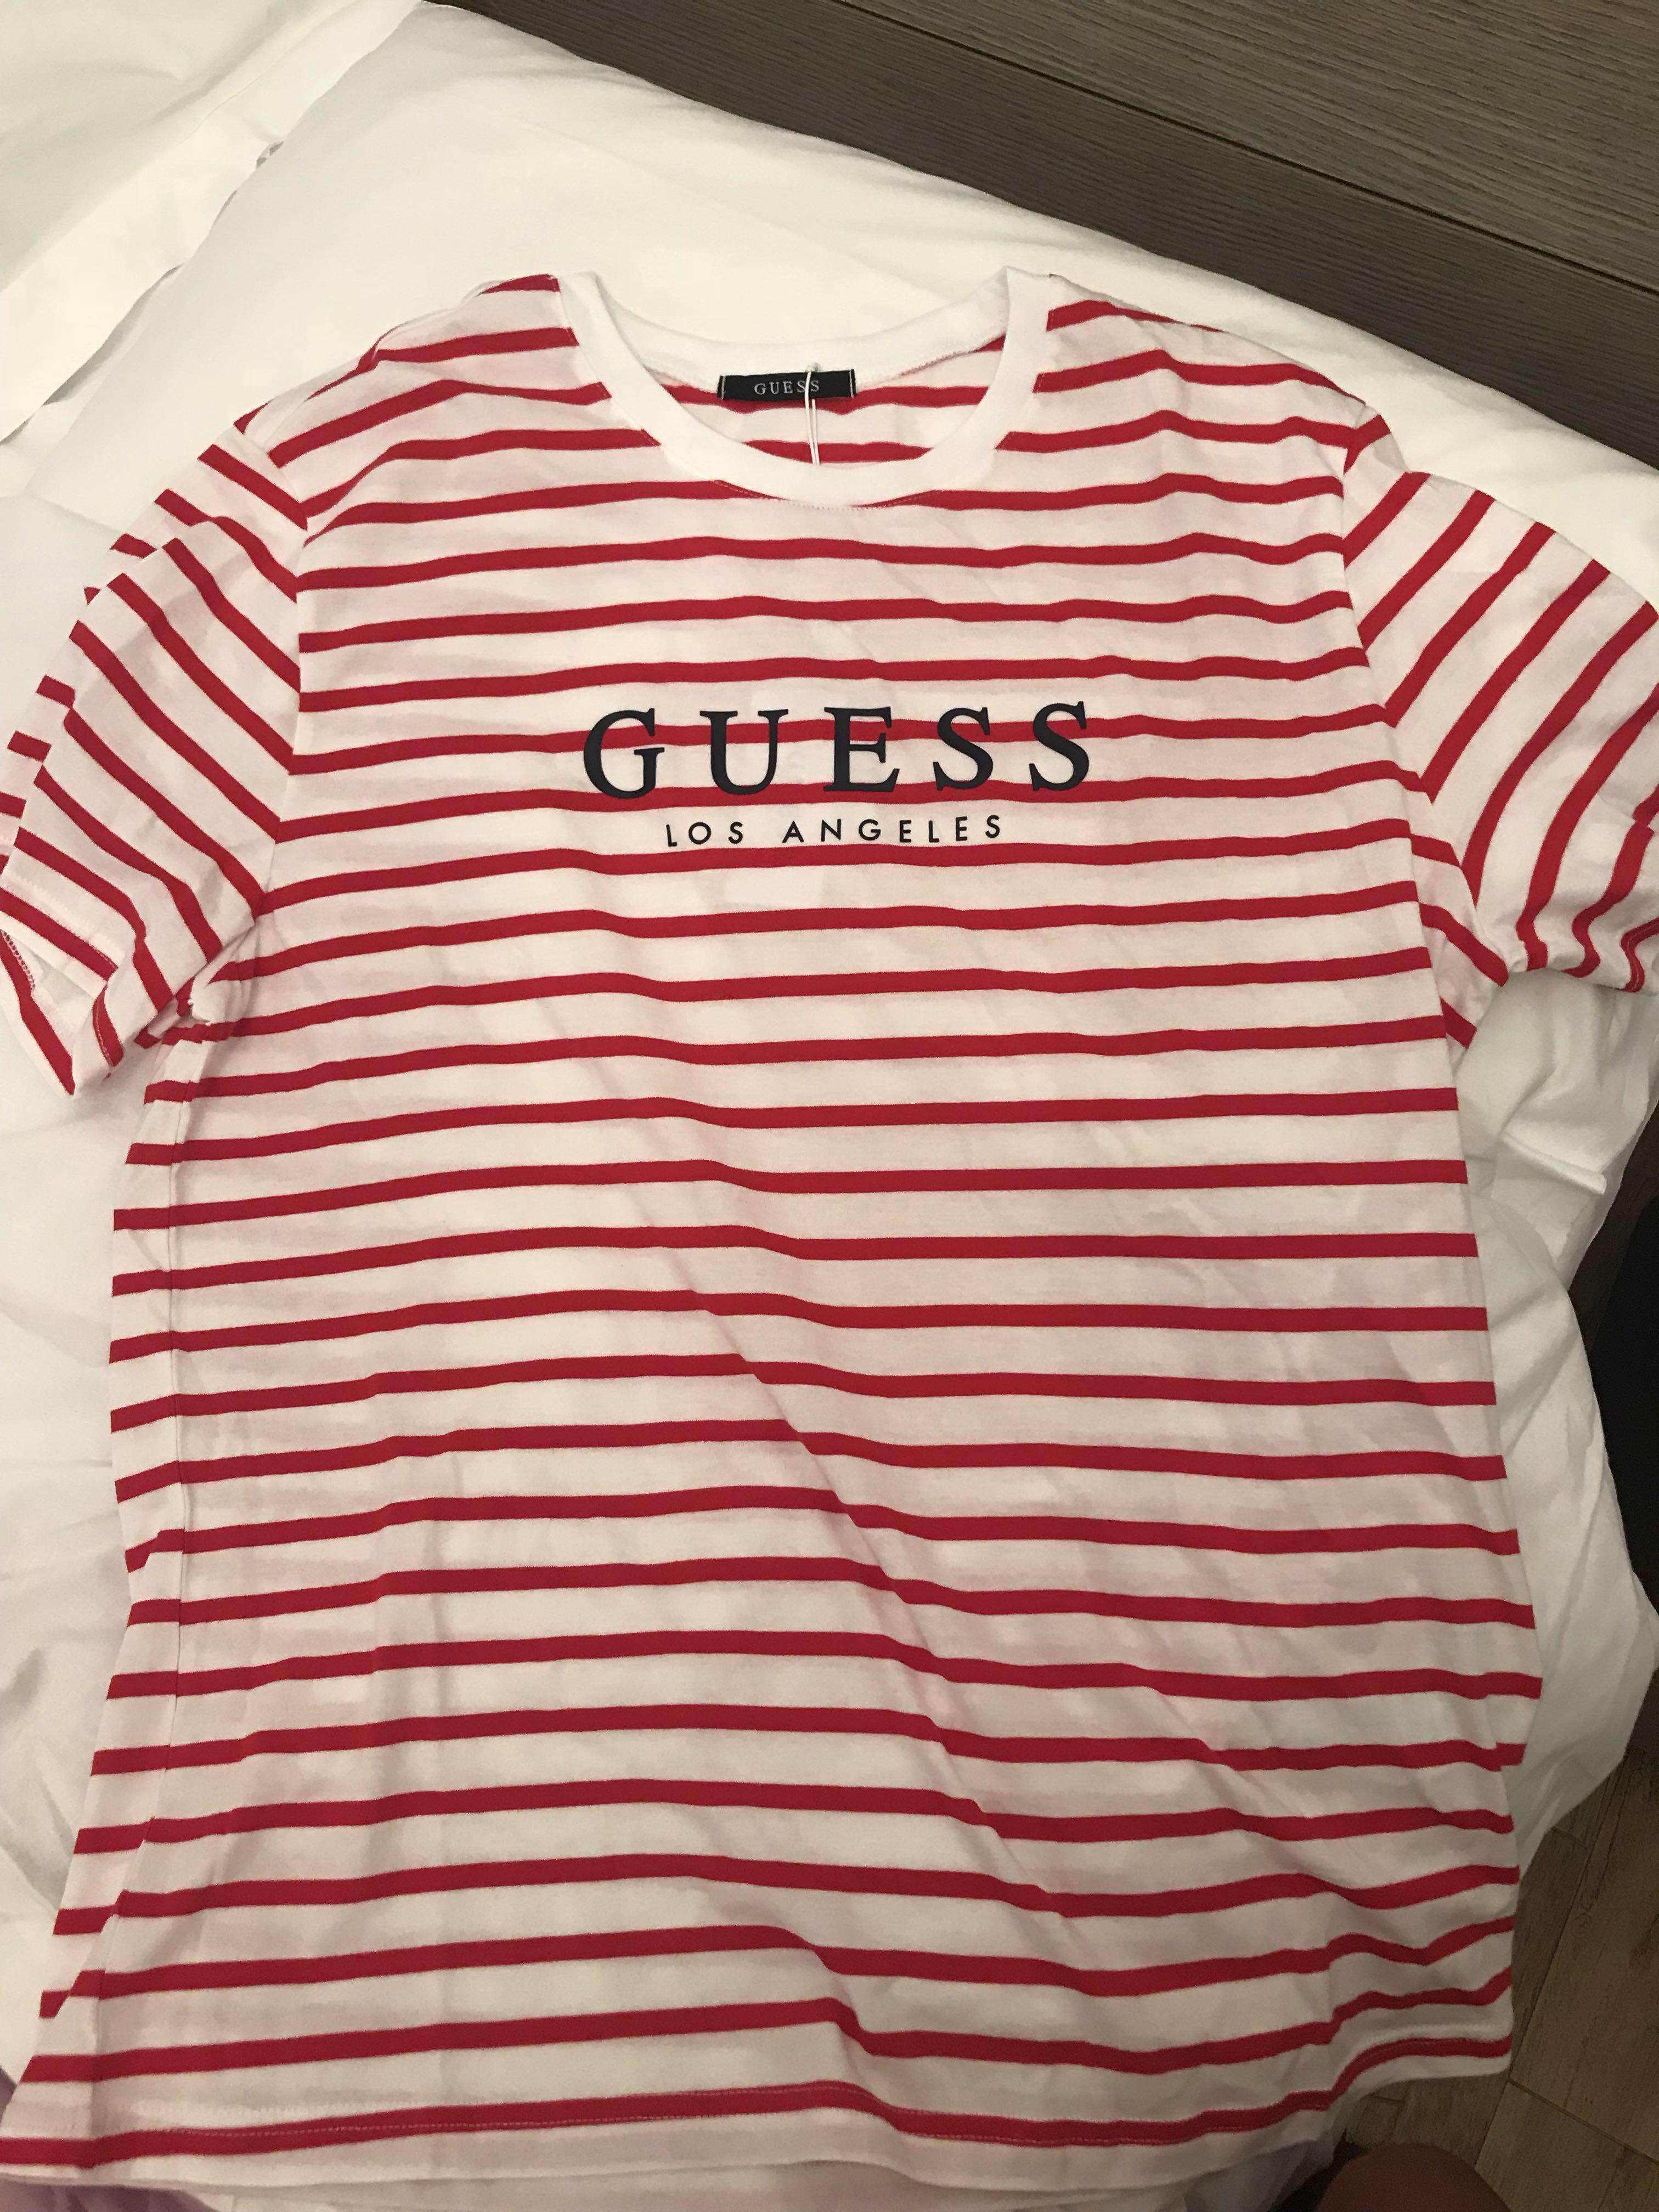 guess red and white striped t shirt